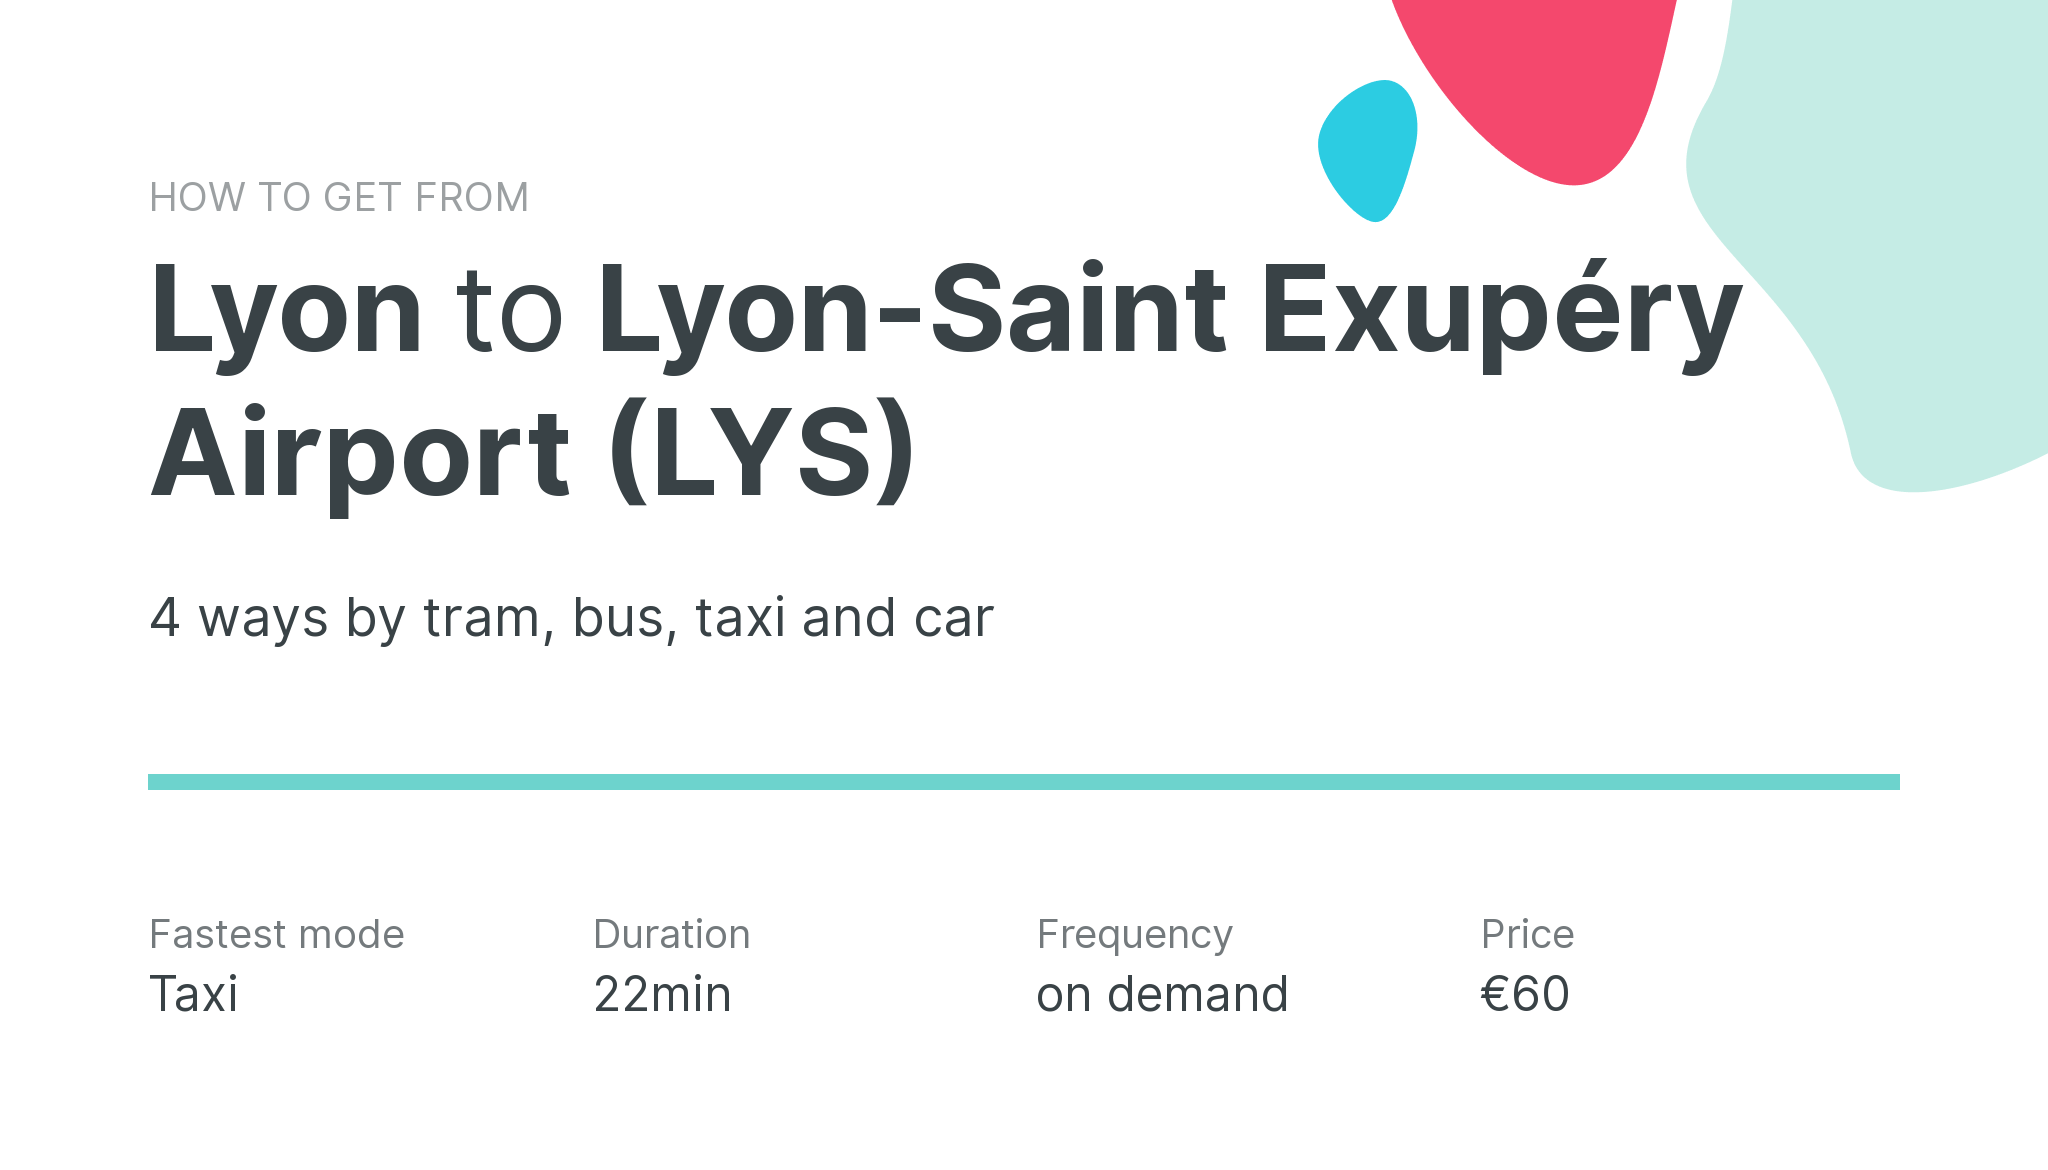 How do I get from Lyon to Lyon-Saint Exupéry Airport (LYS)